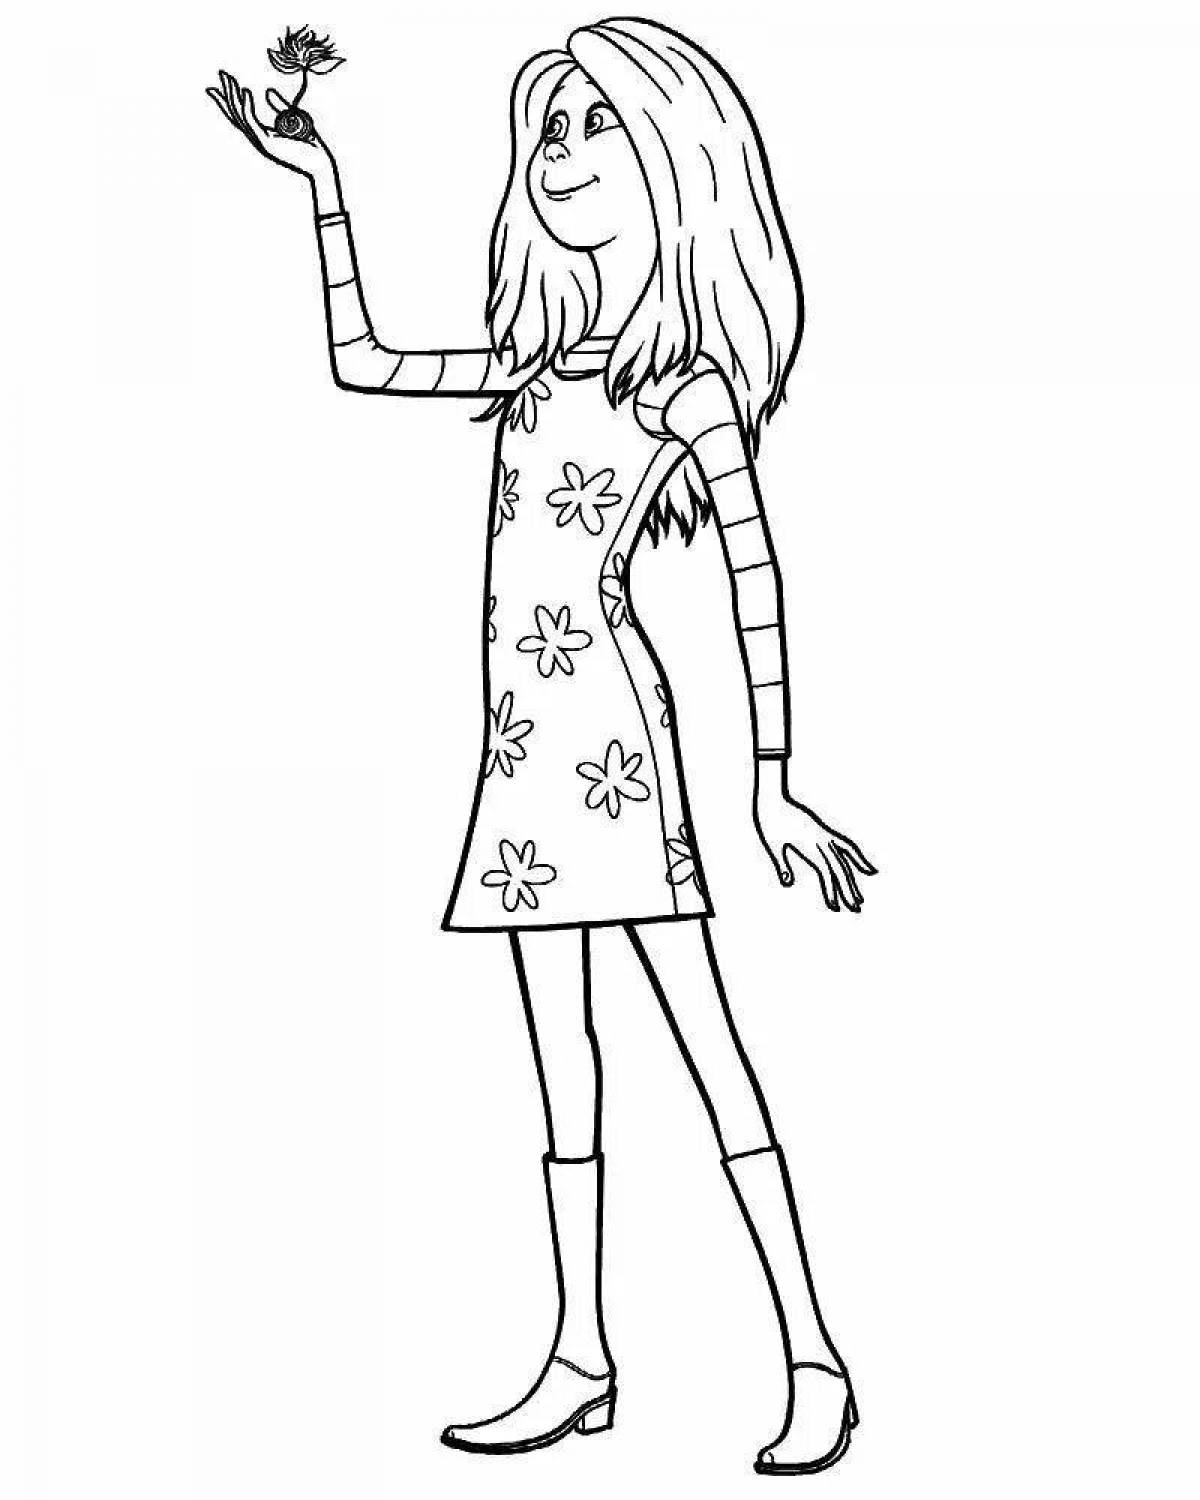 Festive woman coloring pages for kids